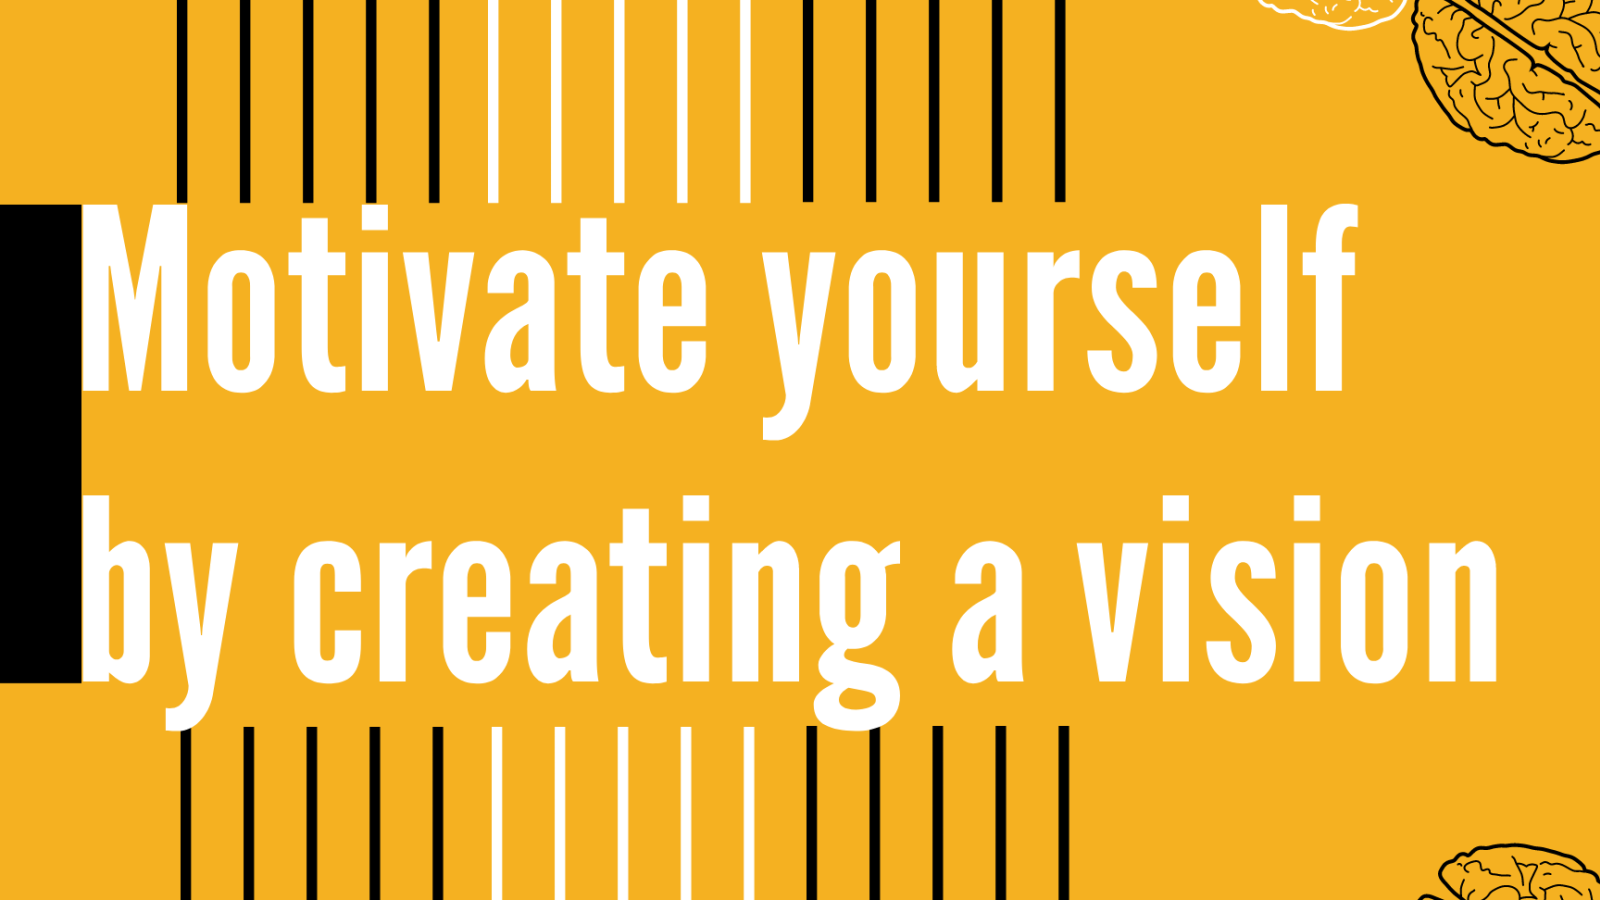 Motivate yourself by creating a vision